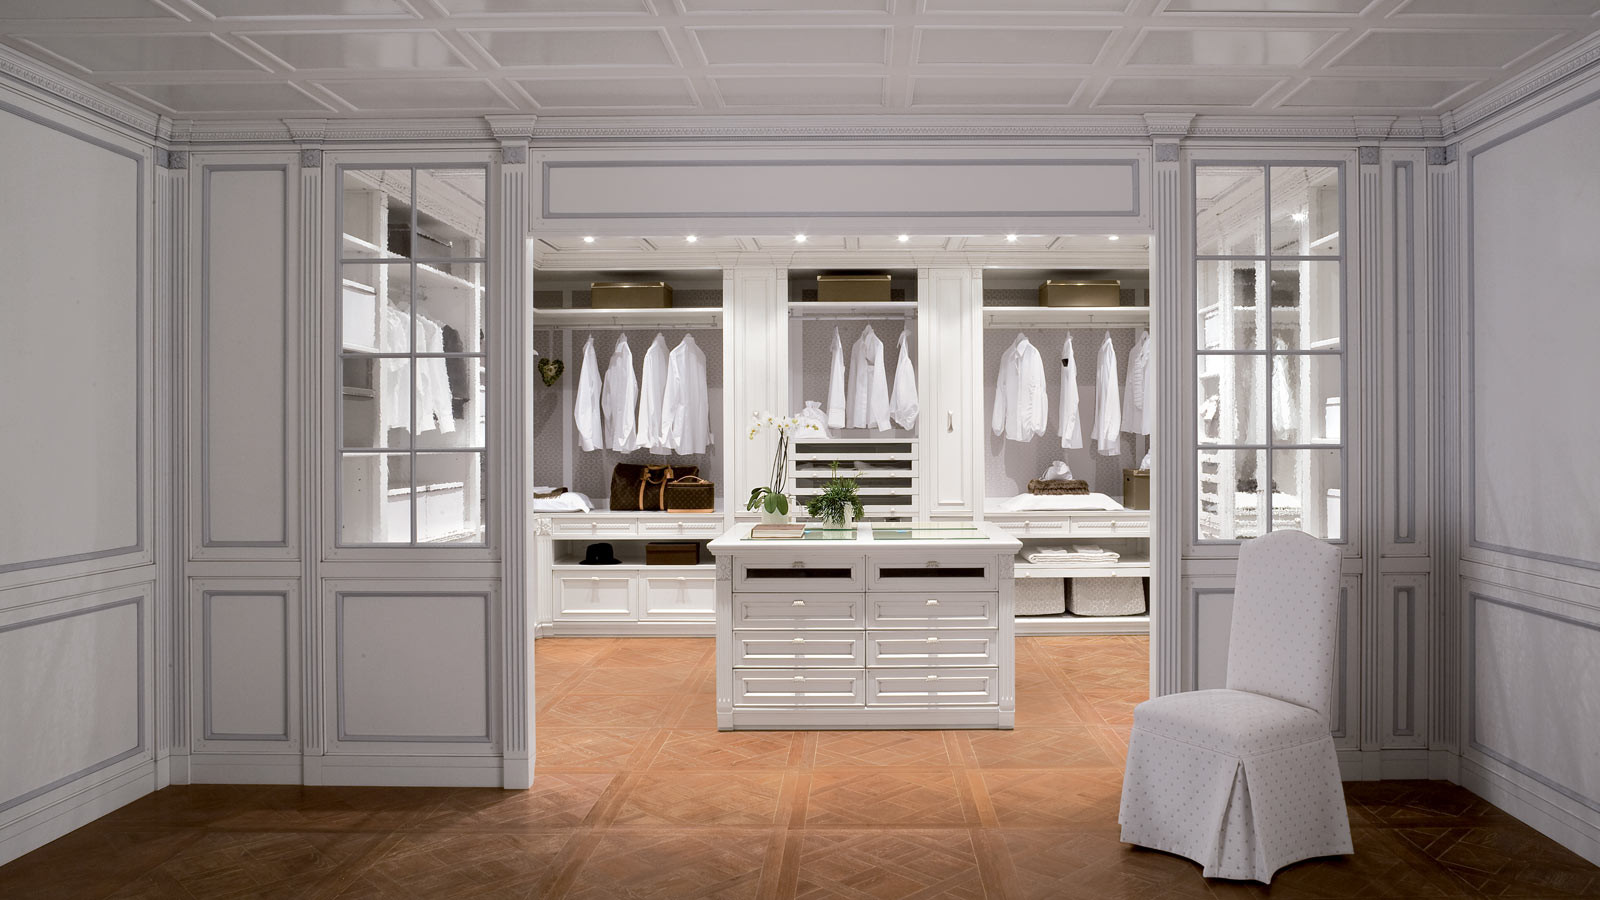 Master Bedroom Closet
 Top Features of a Modern Luxury Home